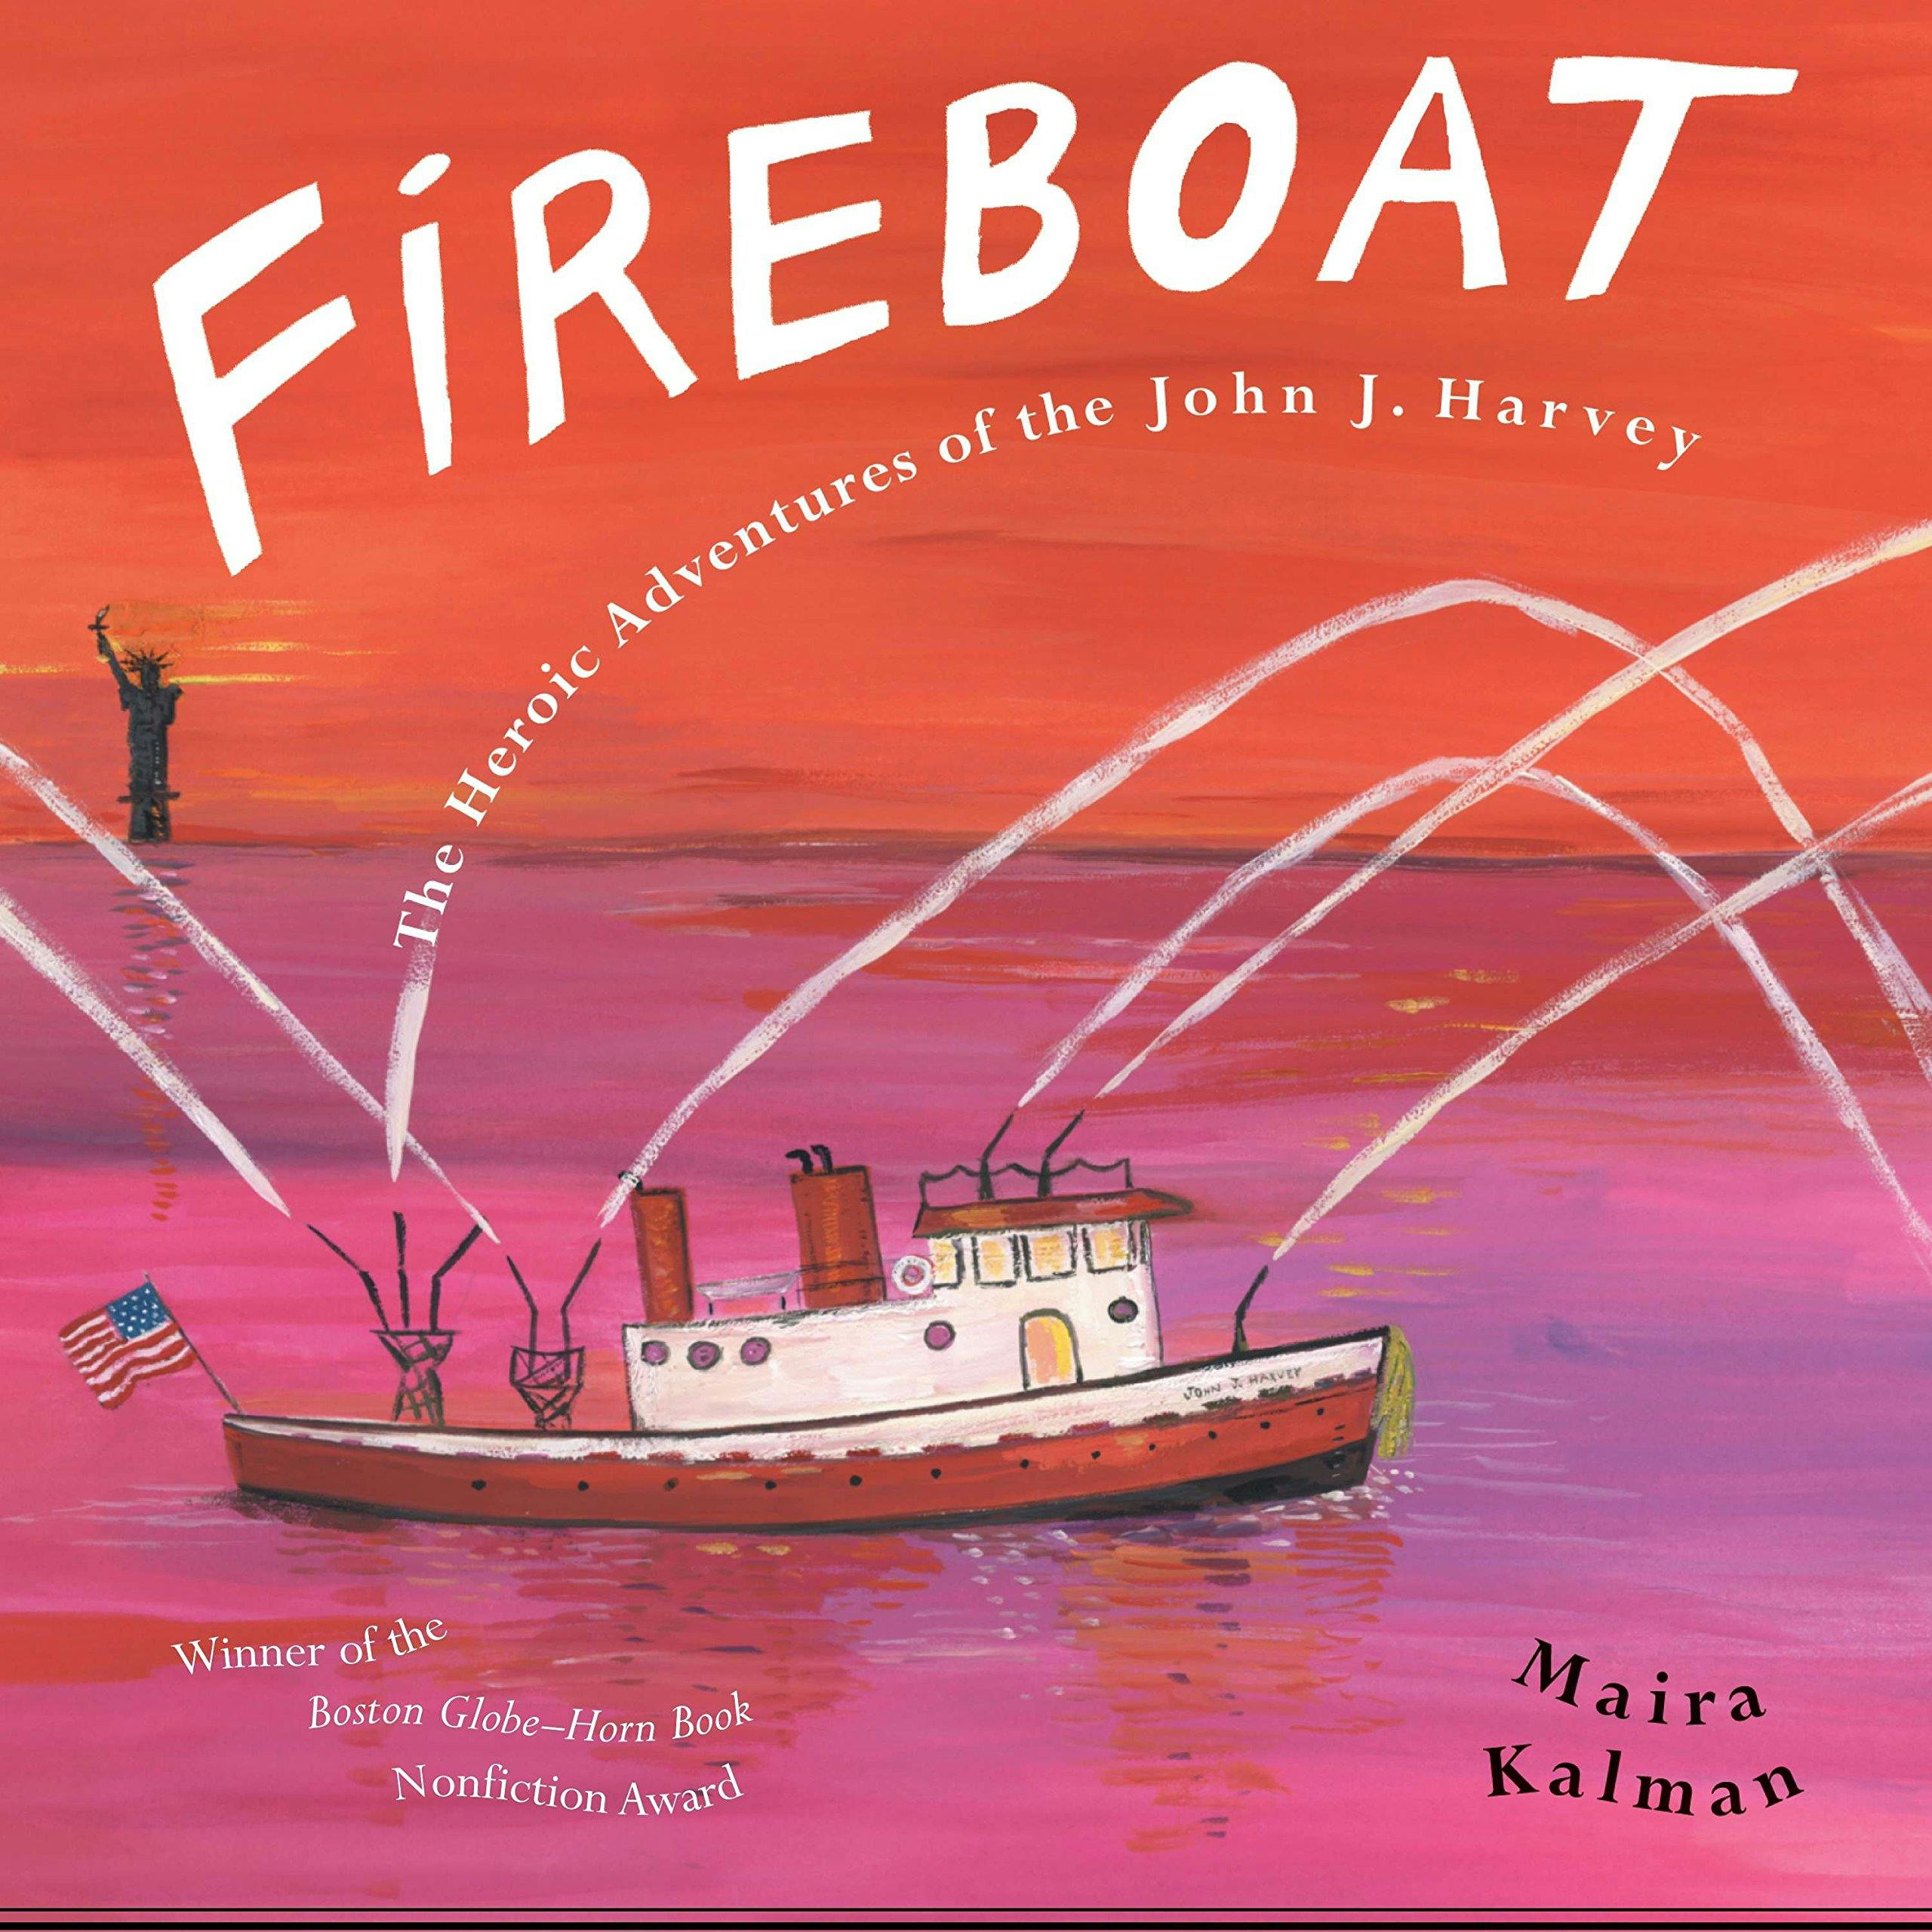 book cover for fireboat the heroic adventure of the john J. harvey